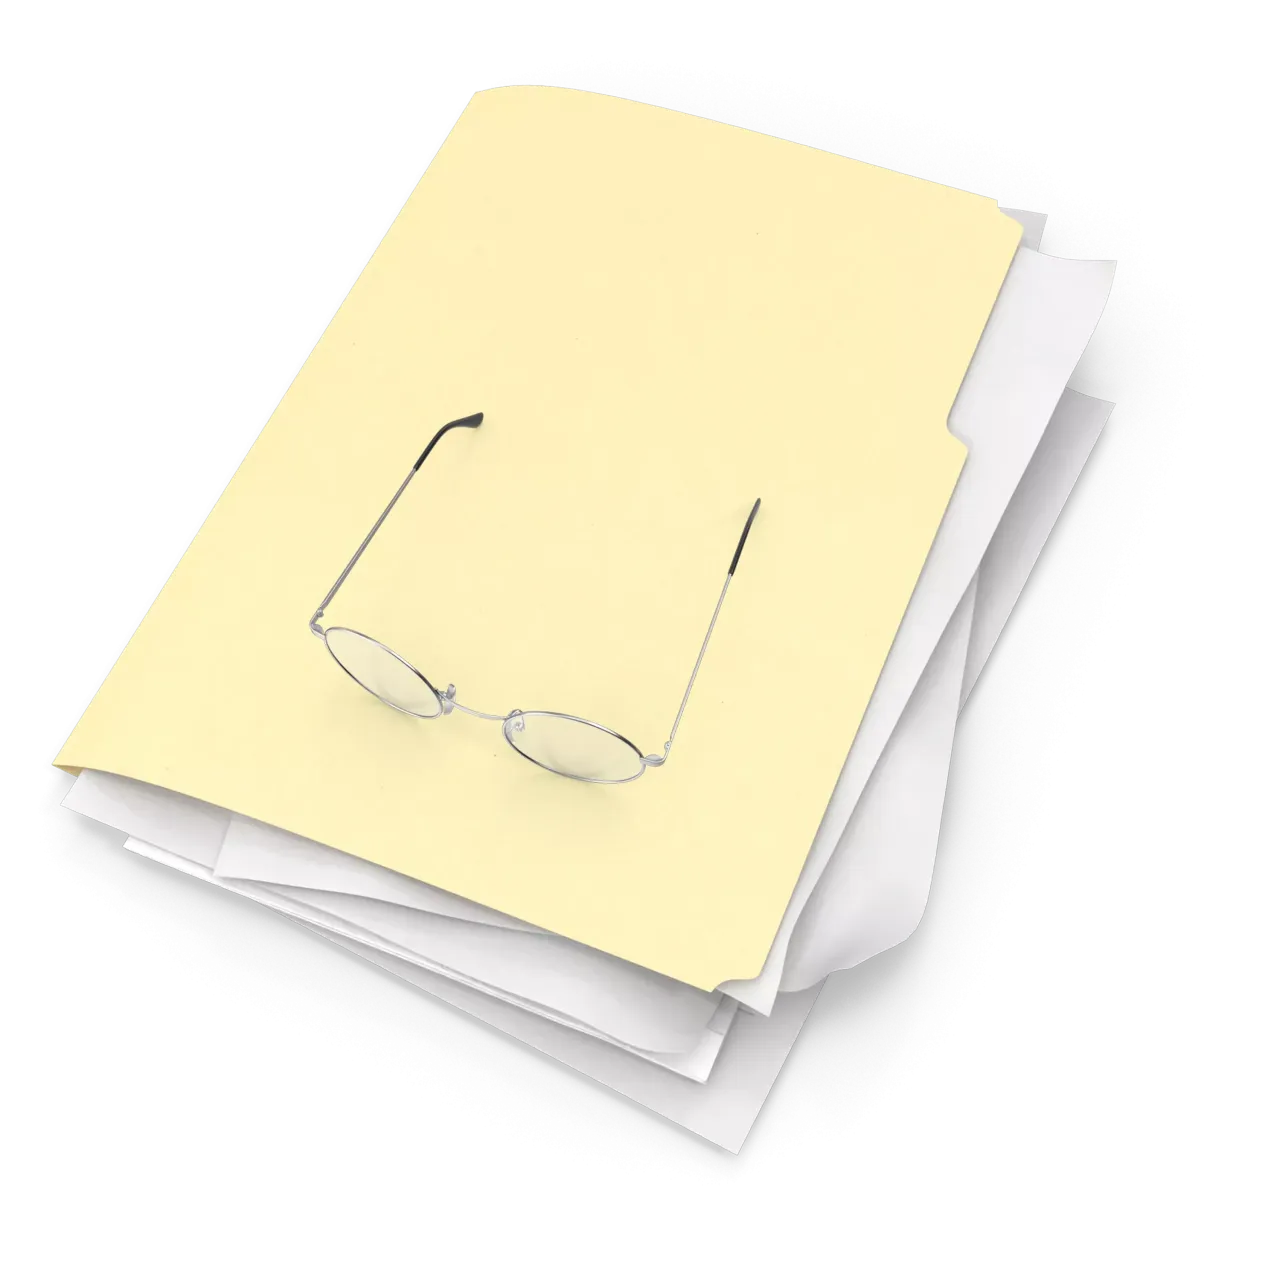 A messy folder and a pair of glasses as the Open Data quickcard header image